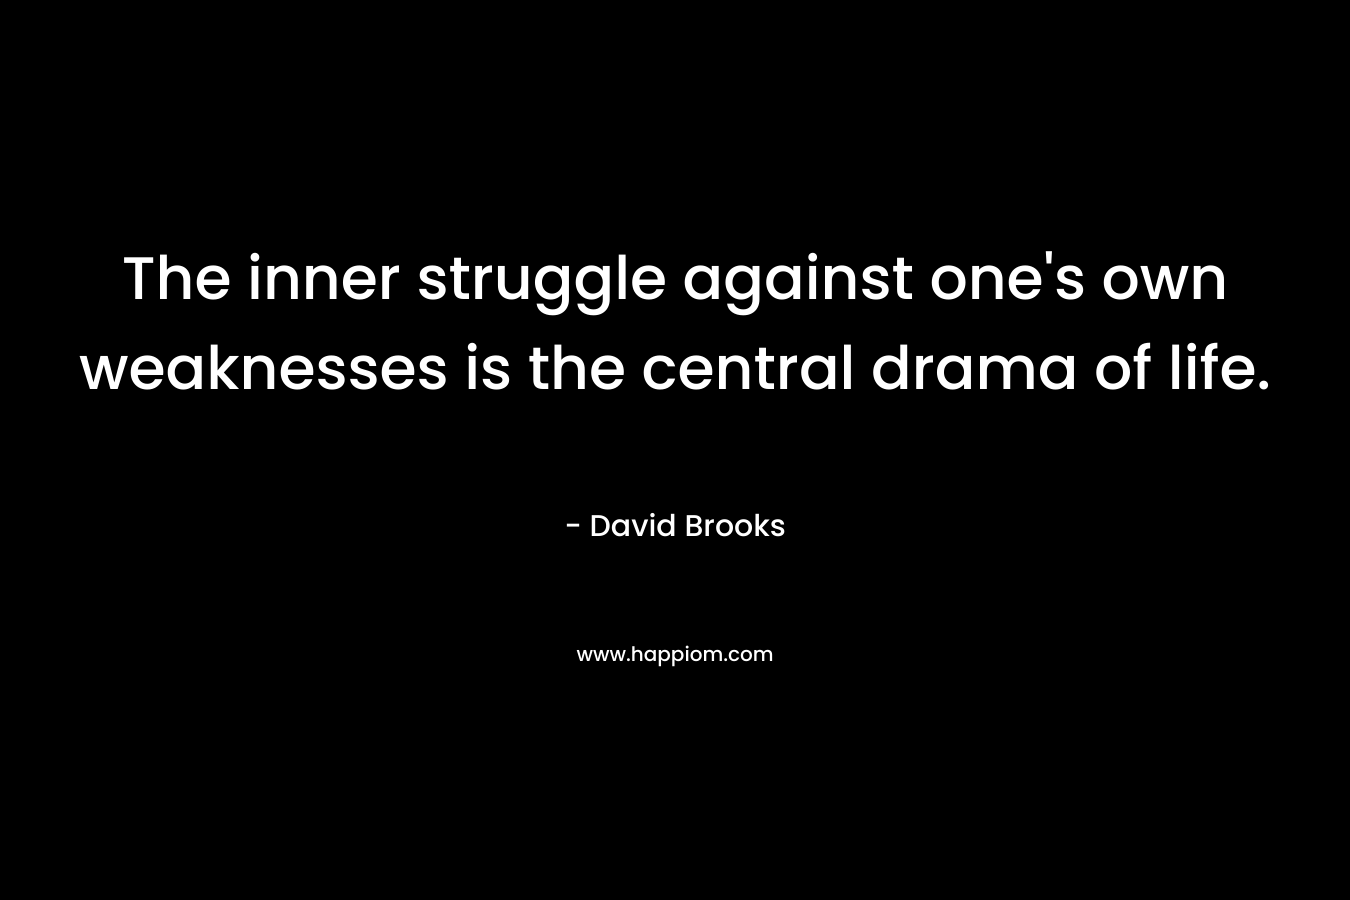 The inner struggle against one’s own weaknesses is the central drama of life. – David Brooks